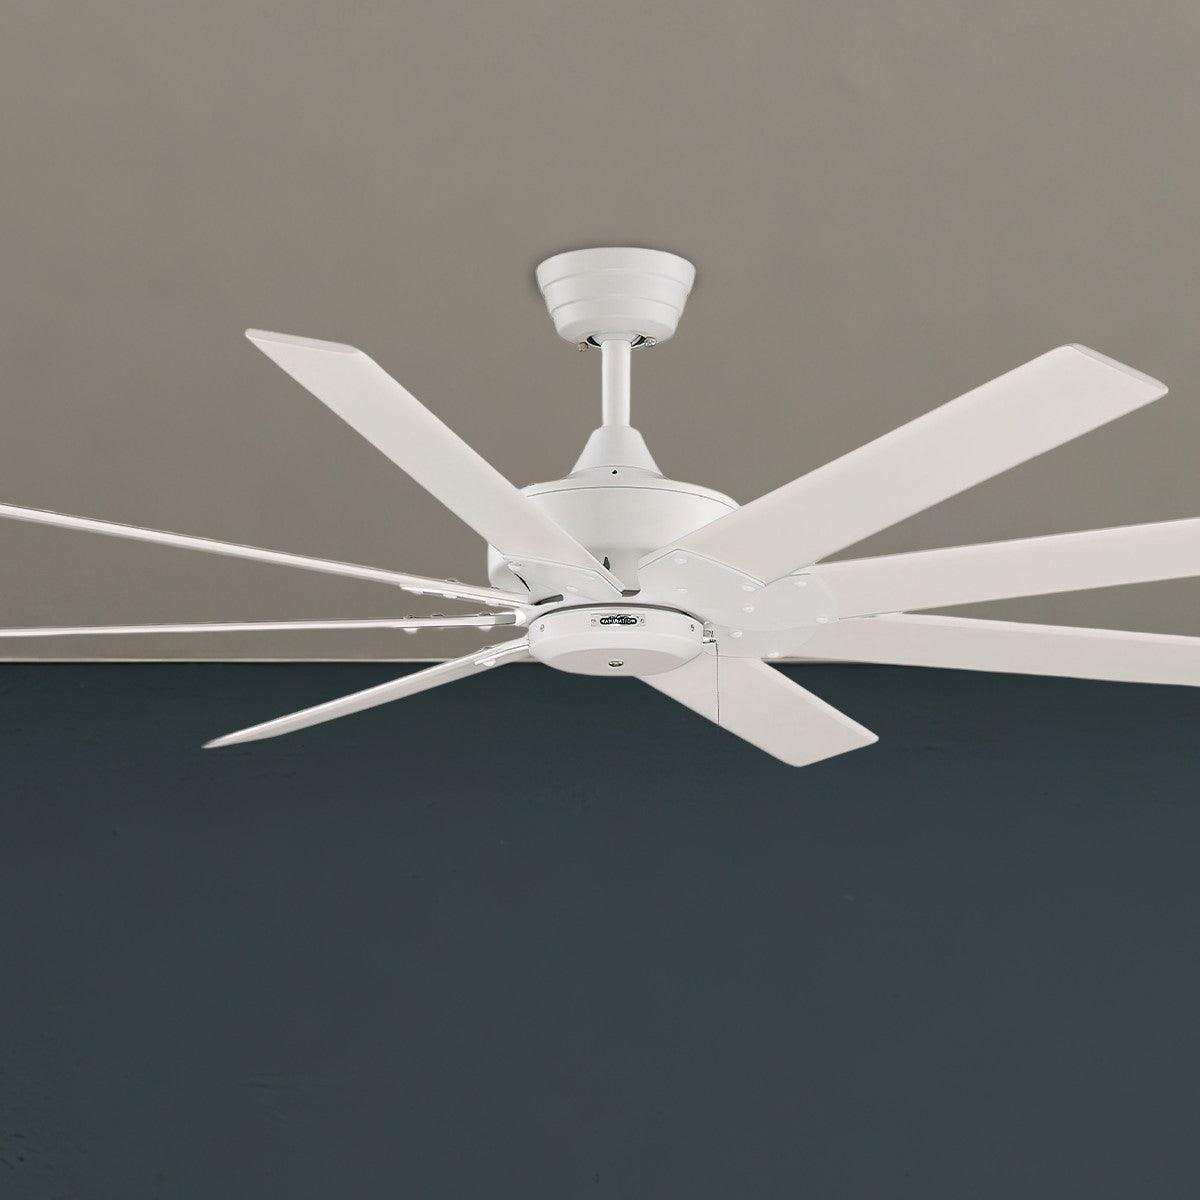 Levon 63 Inch 8 Blades Windmill Ceiling Fan With Pull Chain